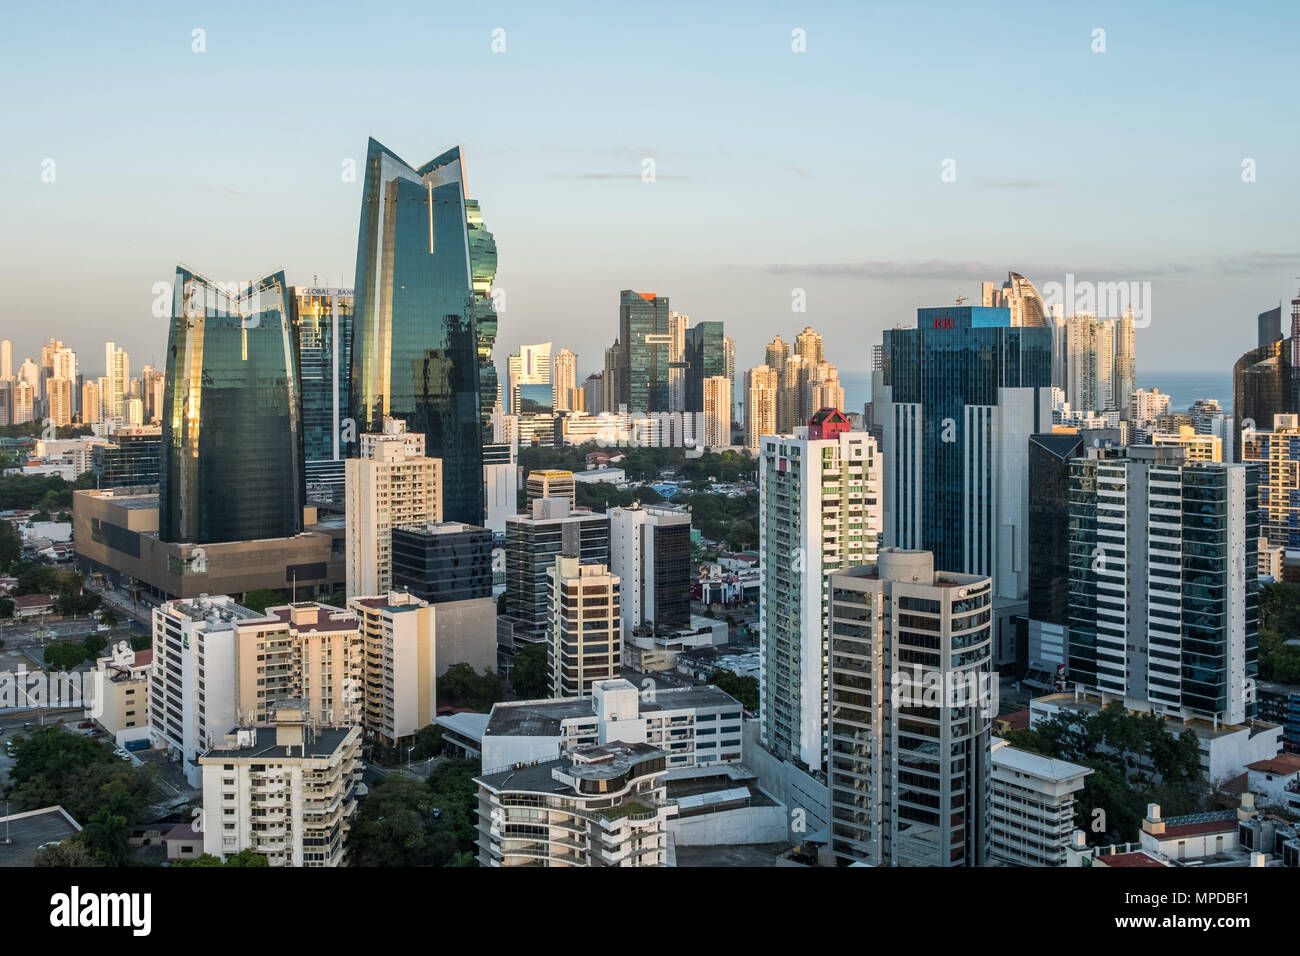 Panama City, Panama- march 2018:Aerial view of the city skyline of Panama City business district Stock Photo